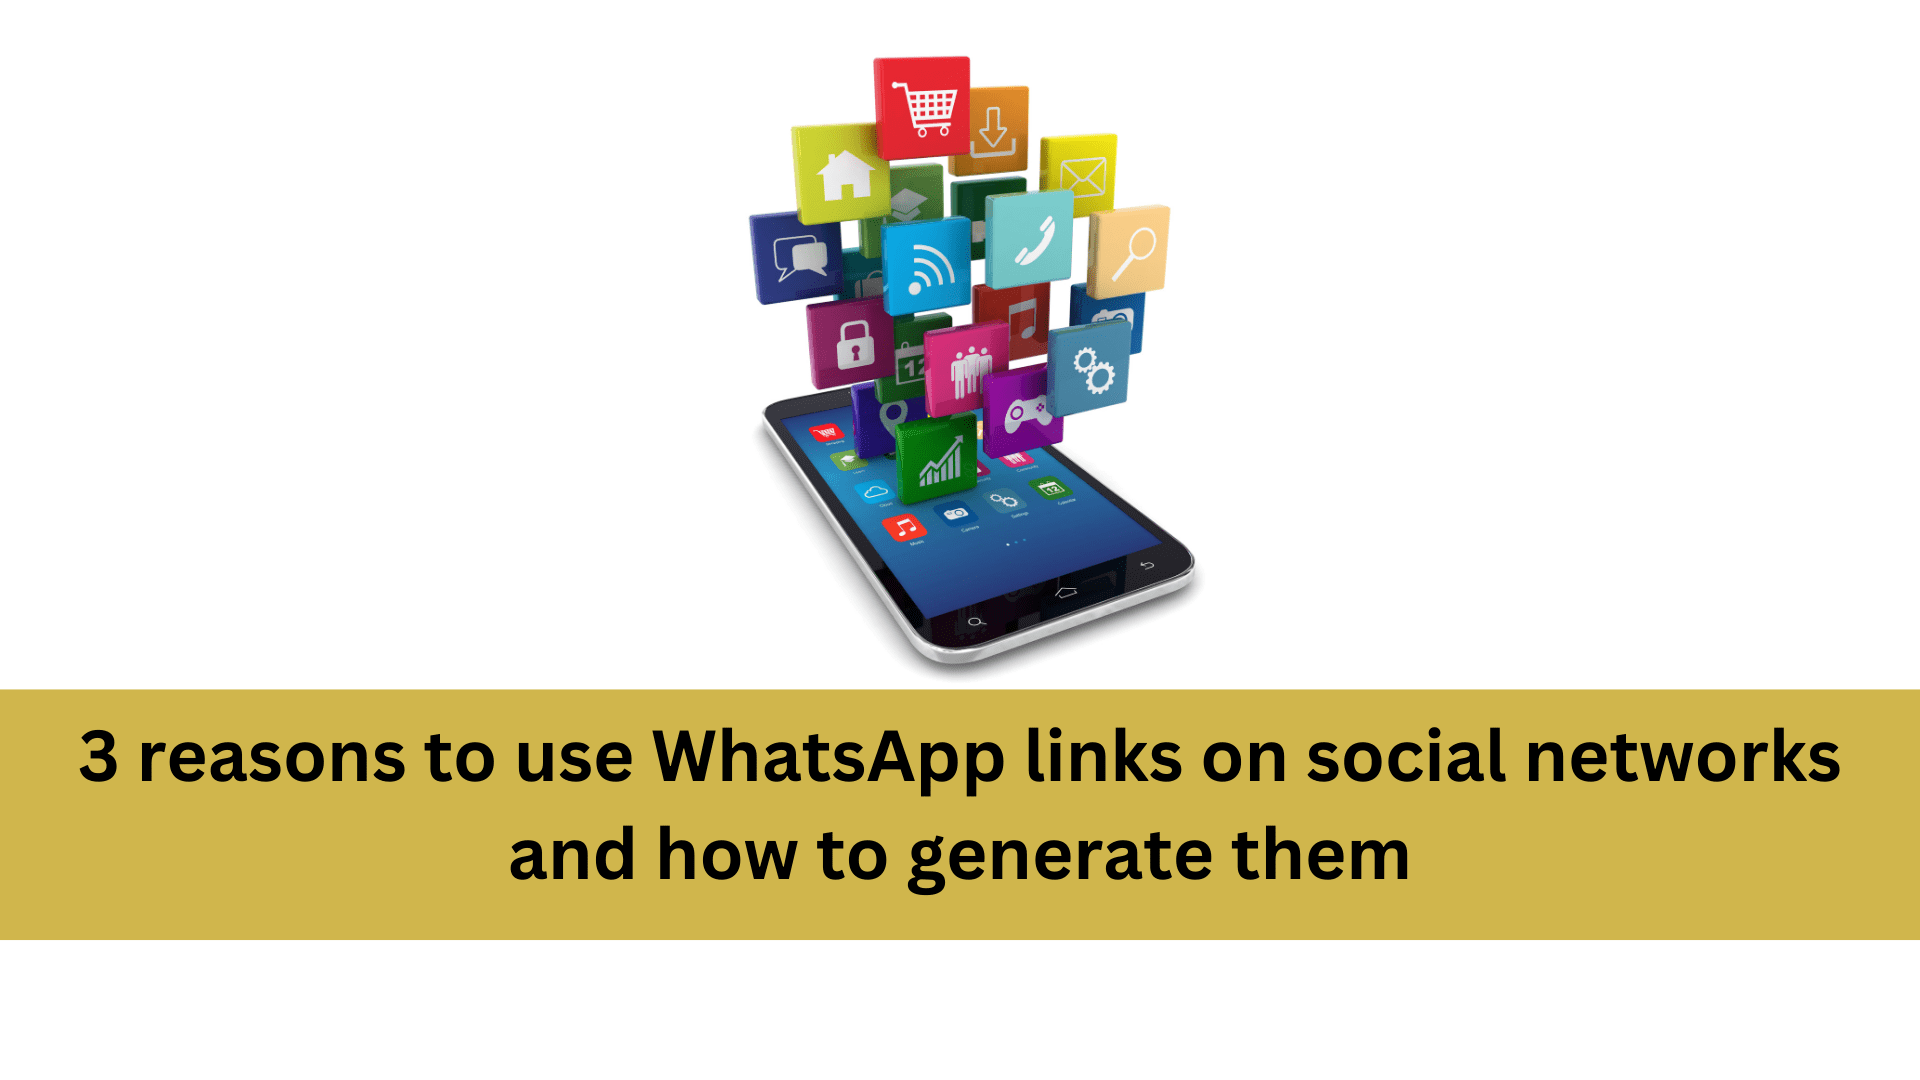 3 reasons to use WhatsApp links on social networks and how to generate them